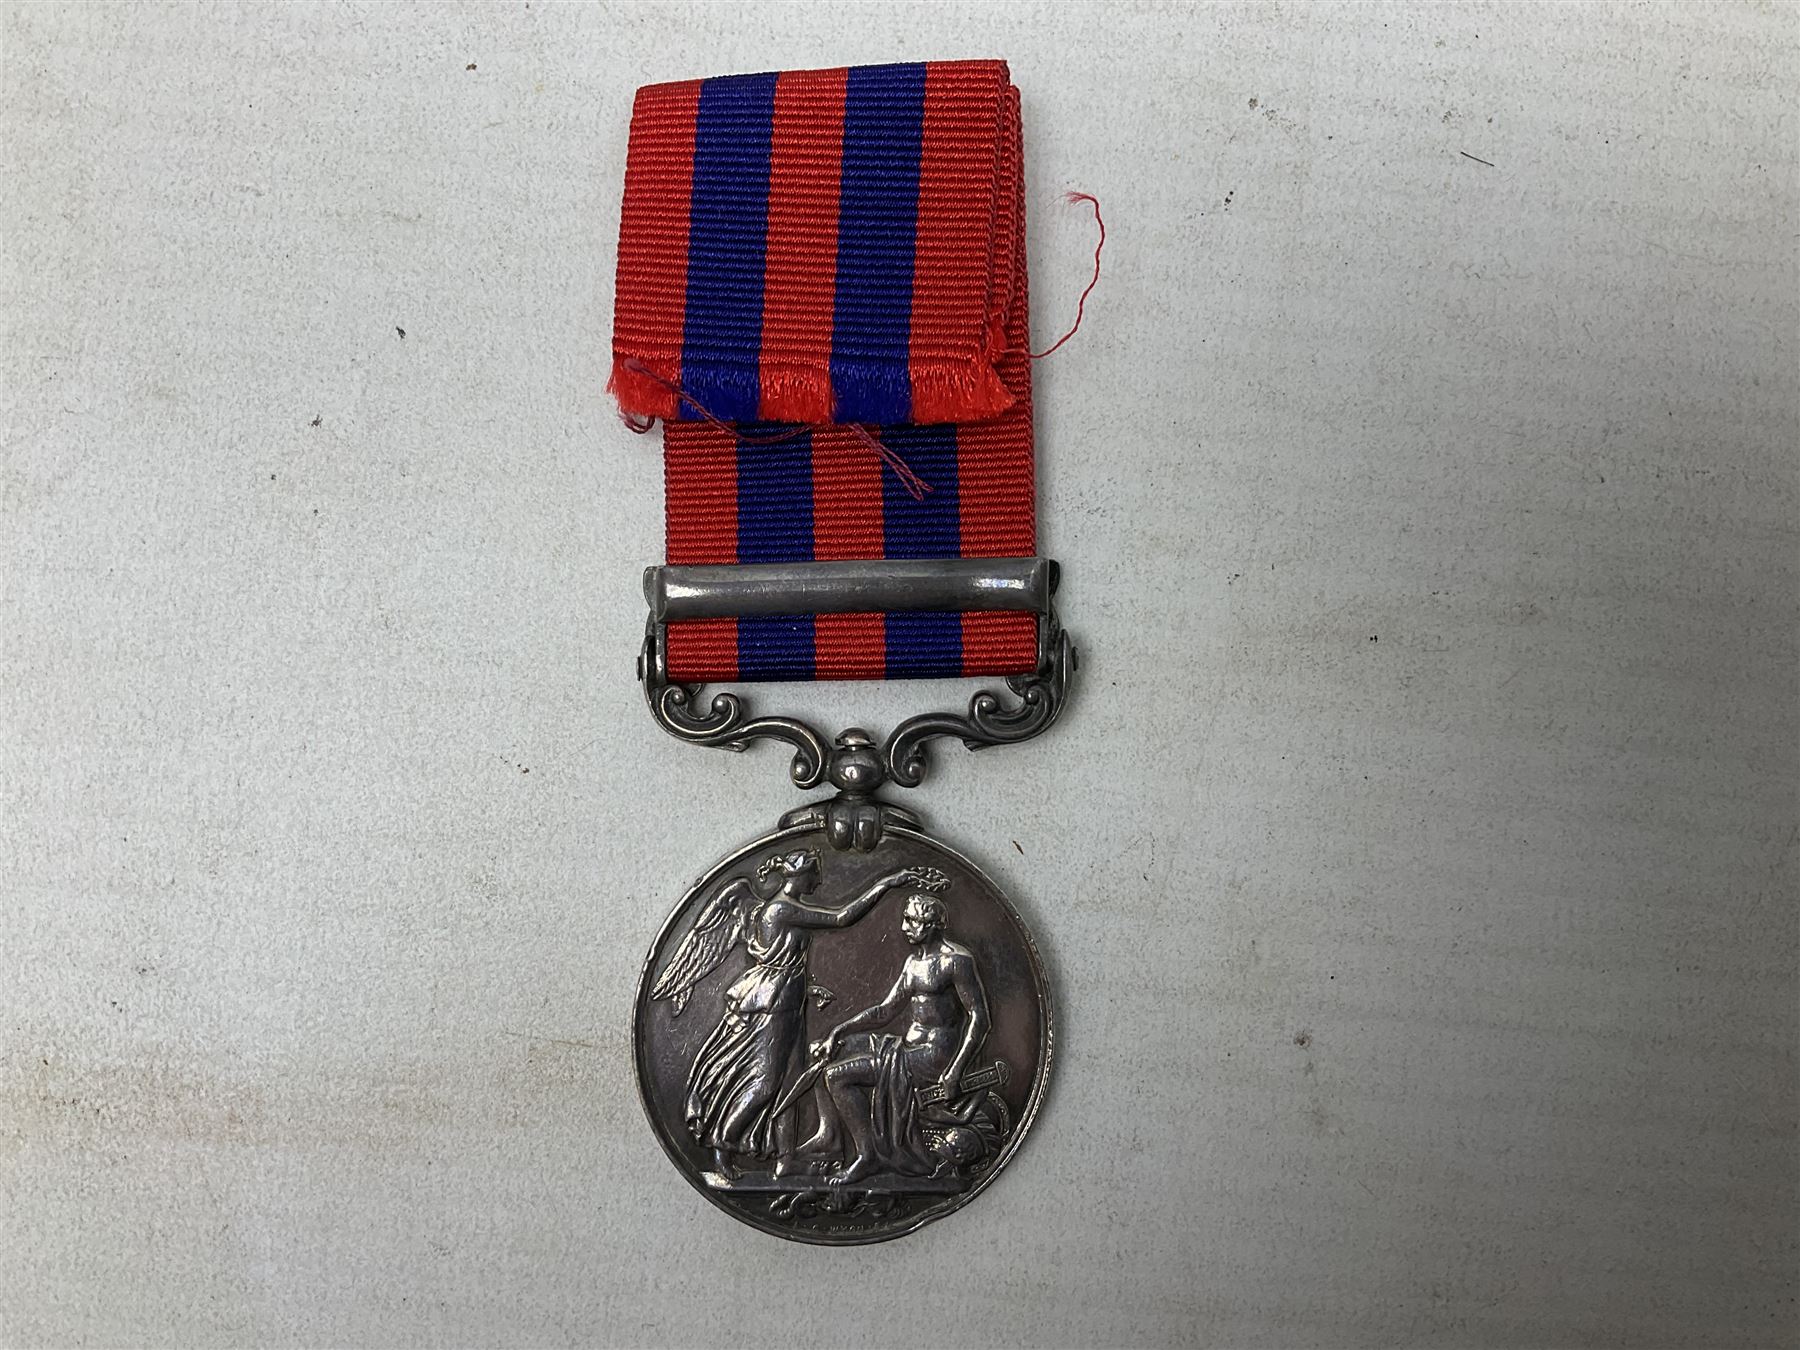 Victoria India General Service Medal with Burma 1885-7 clasp awarded to 1771 Pte. W. Alderman 2nd Bn - Image 6 of 10